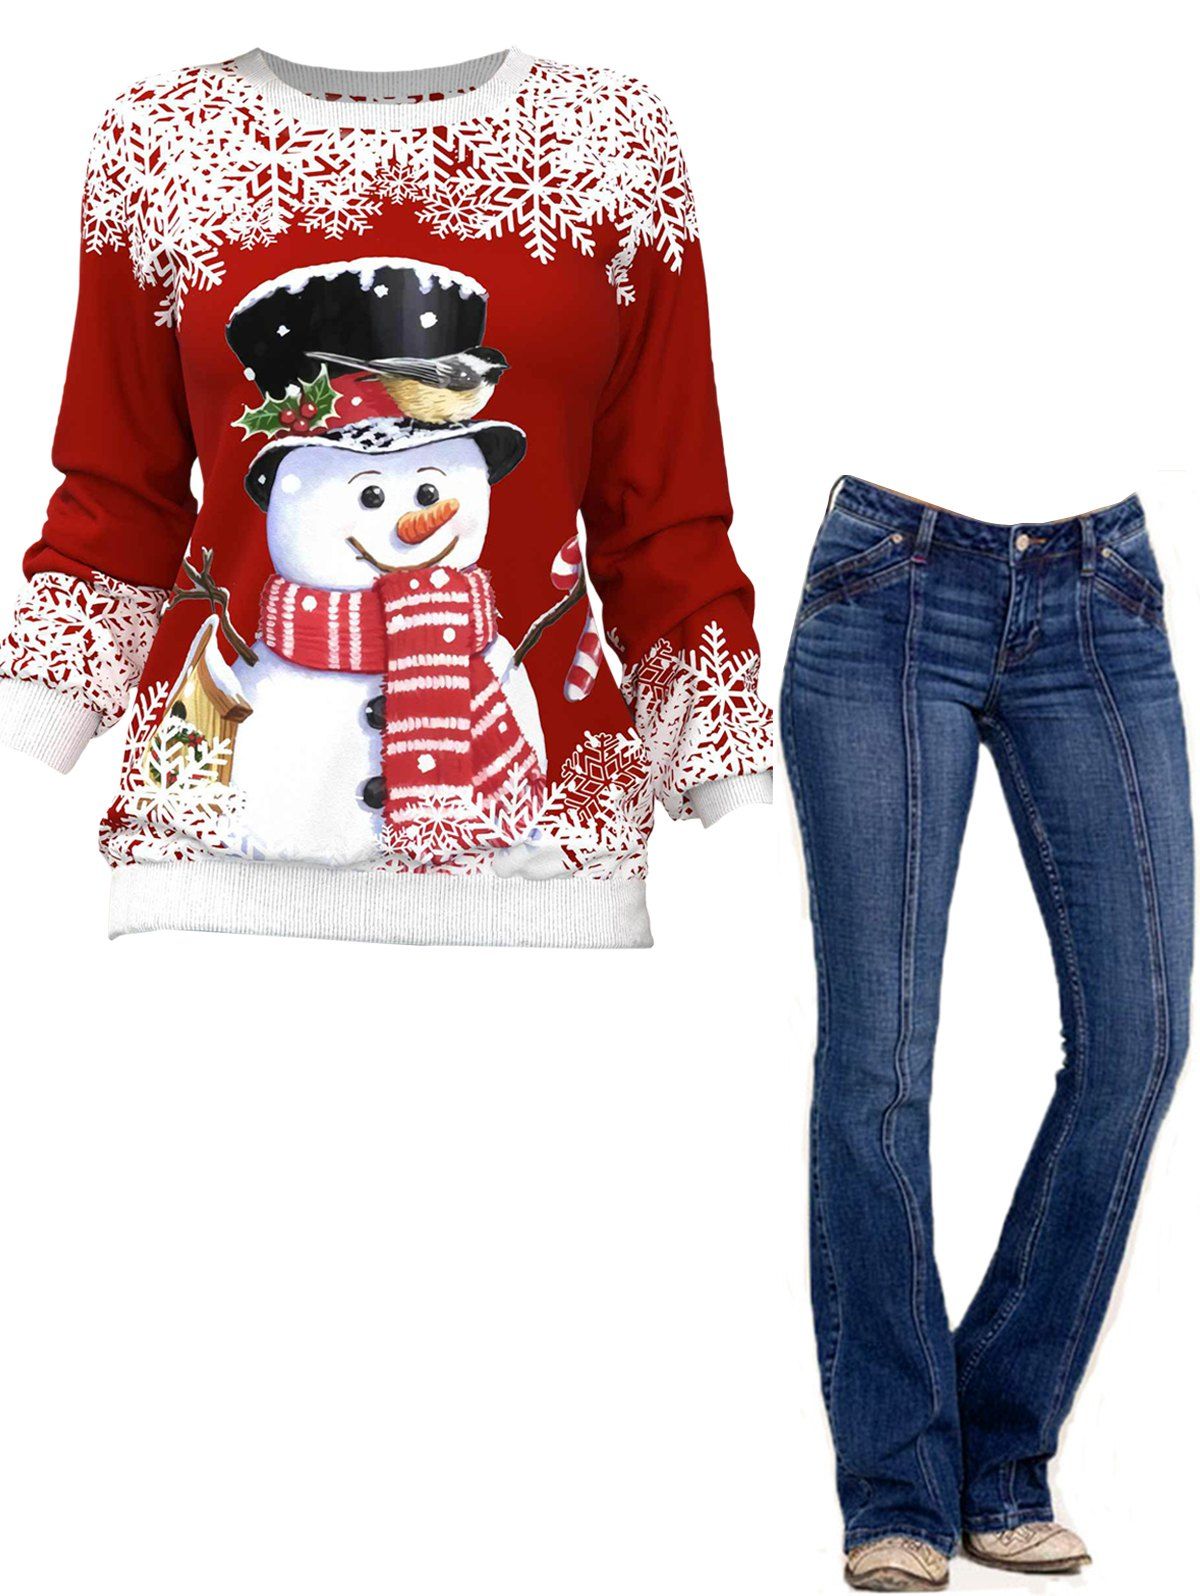 Cute Snowman Snowflake Print Raglan Sleeve Sweatshirt And Topstitching Flare Jeans Christmas Outfit - multicolor M